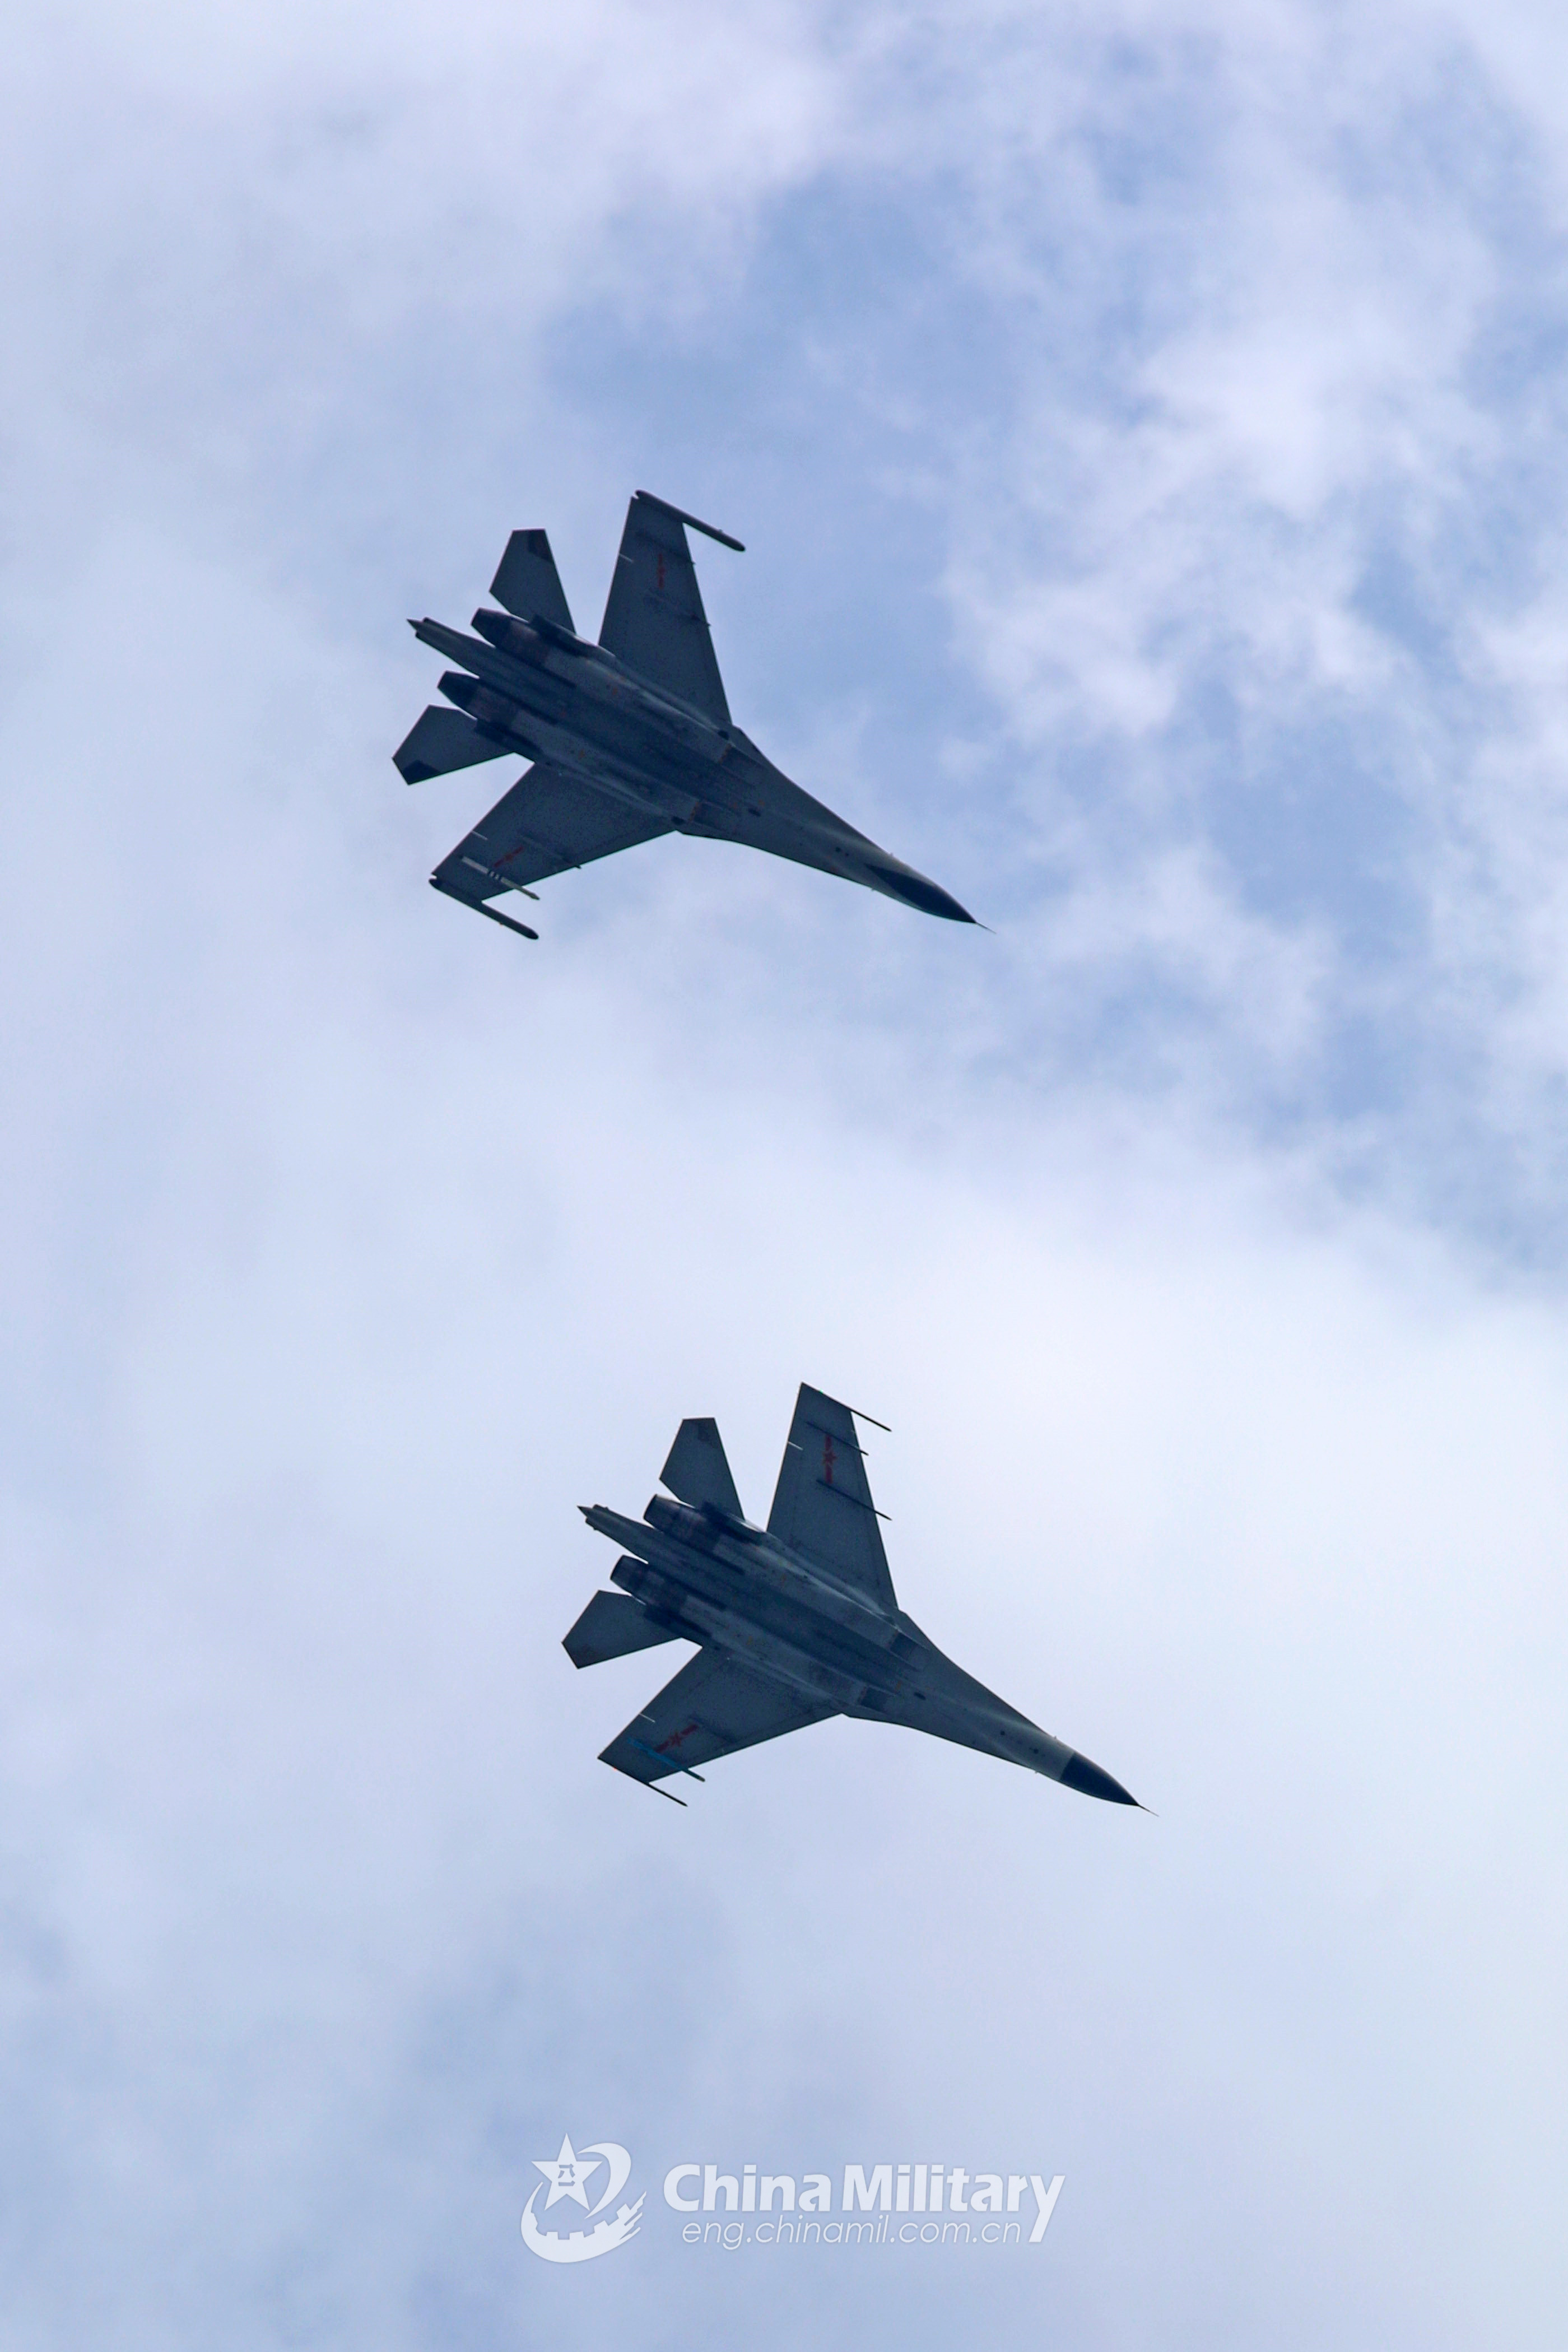 Fleet of fighter jets fly over the sky Ministry of National Defense